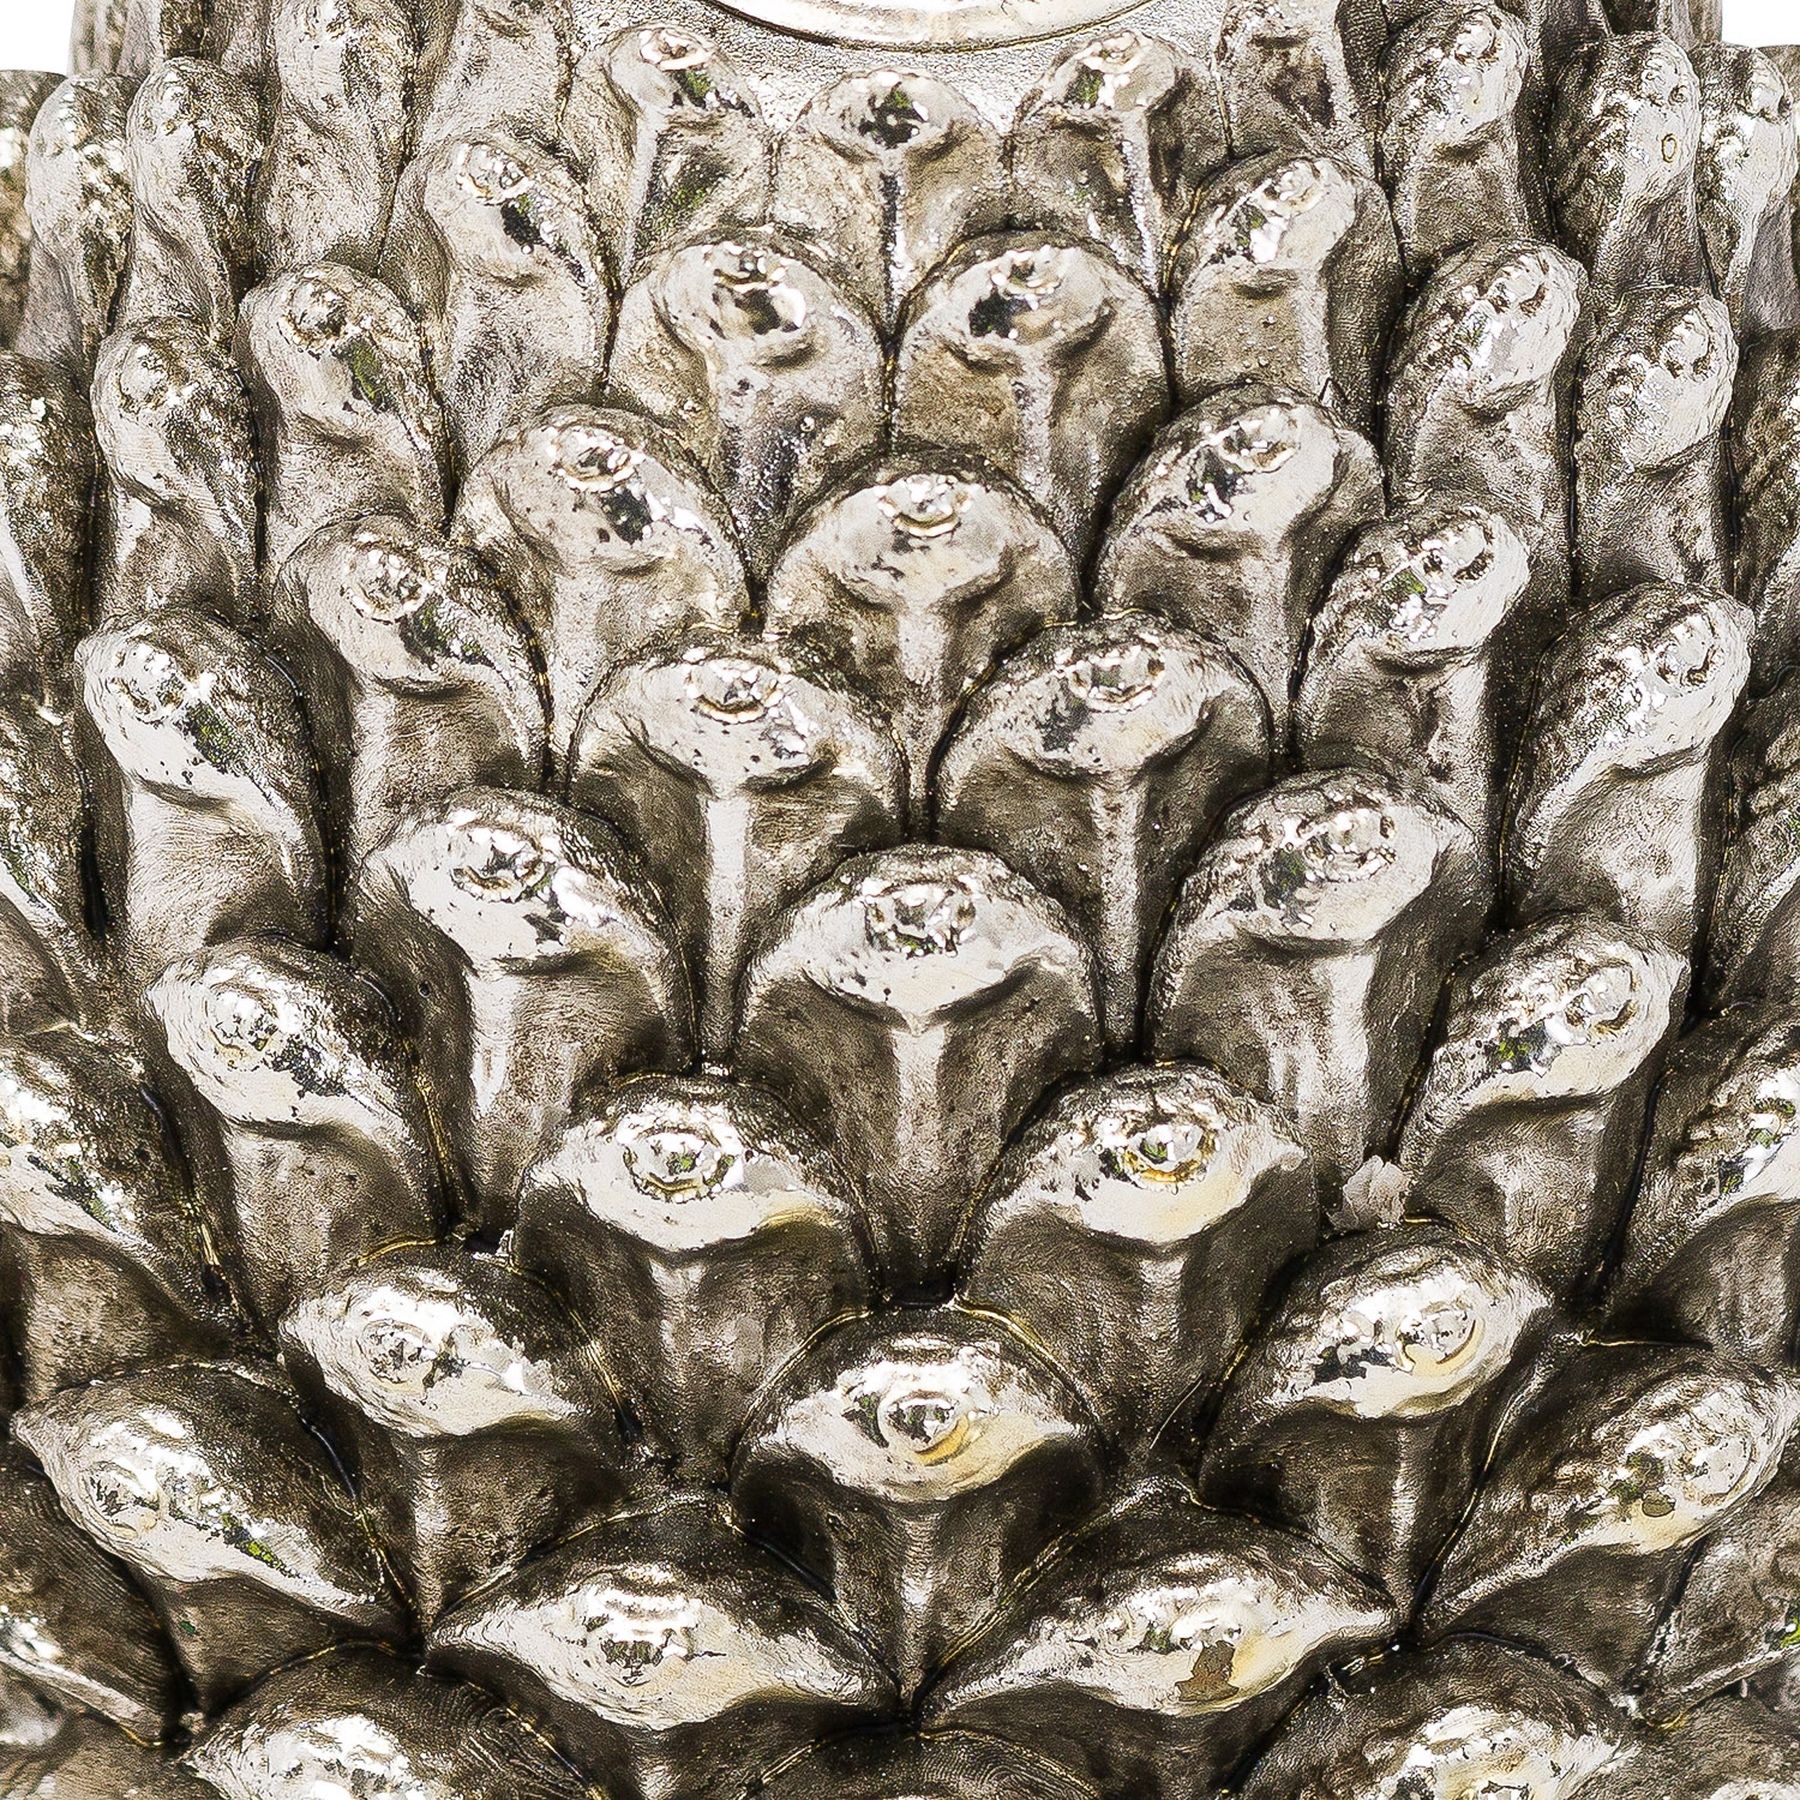 Large Silver Pinecone Candle Holder - Image 2